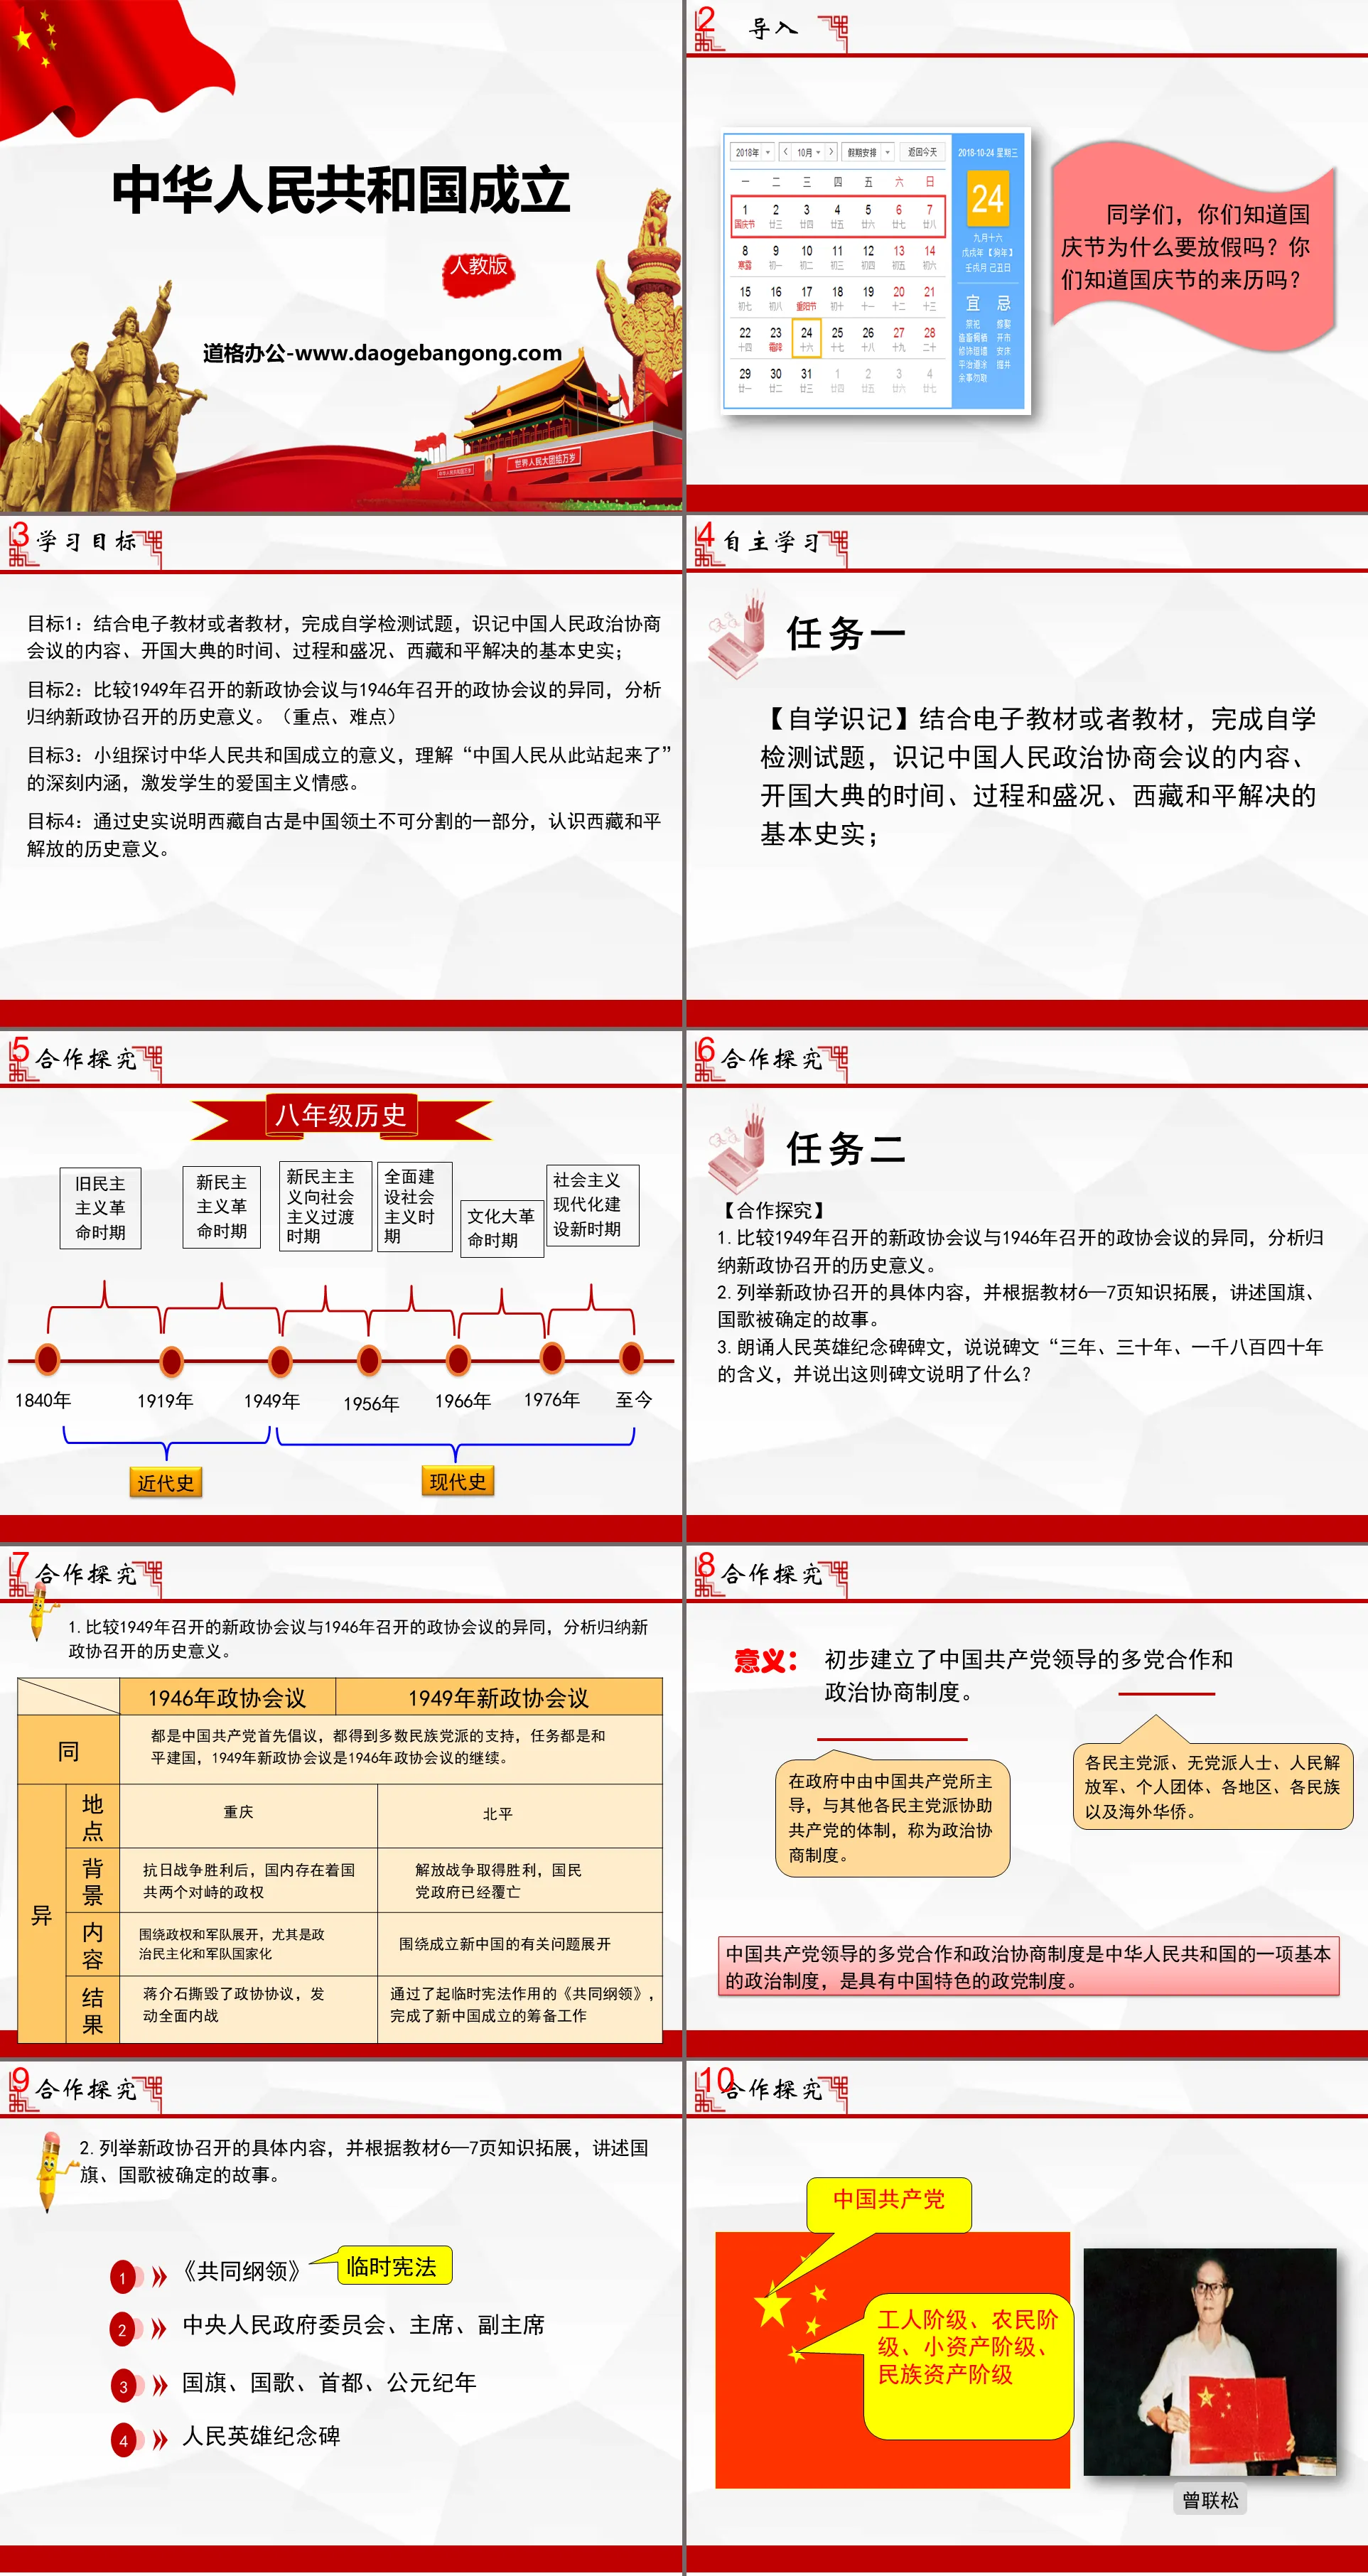 "The Founding of the People's Republic of China" PPT courseware download